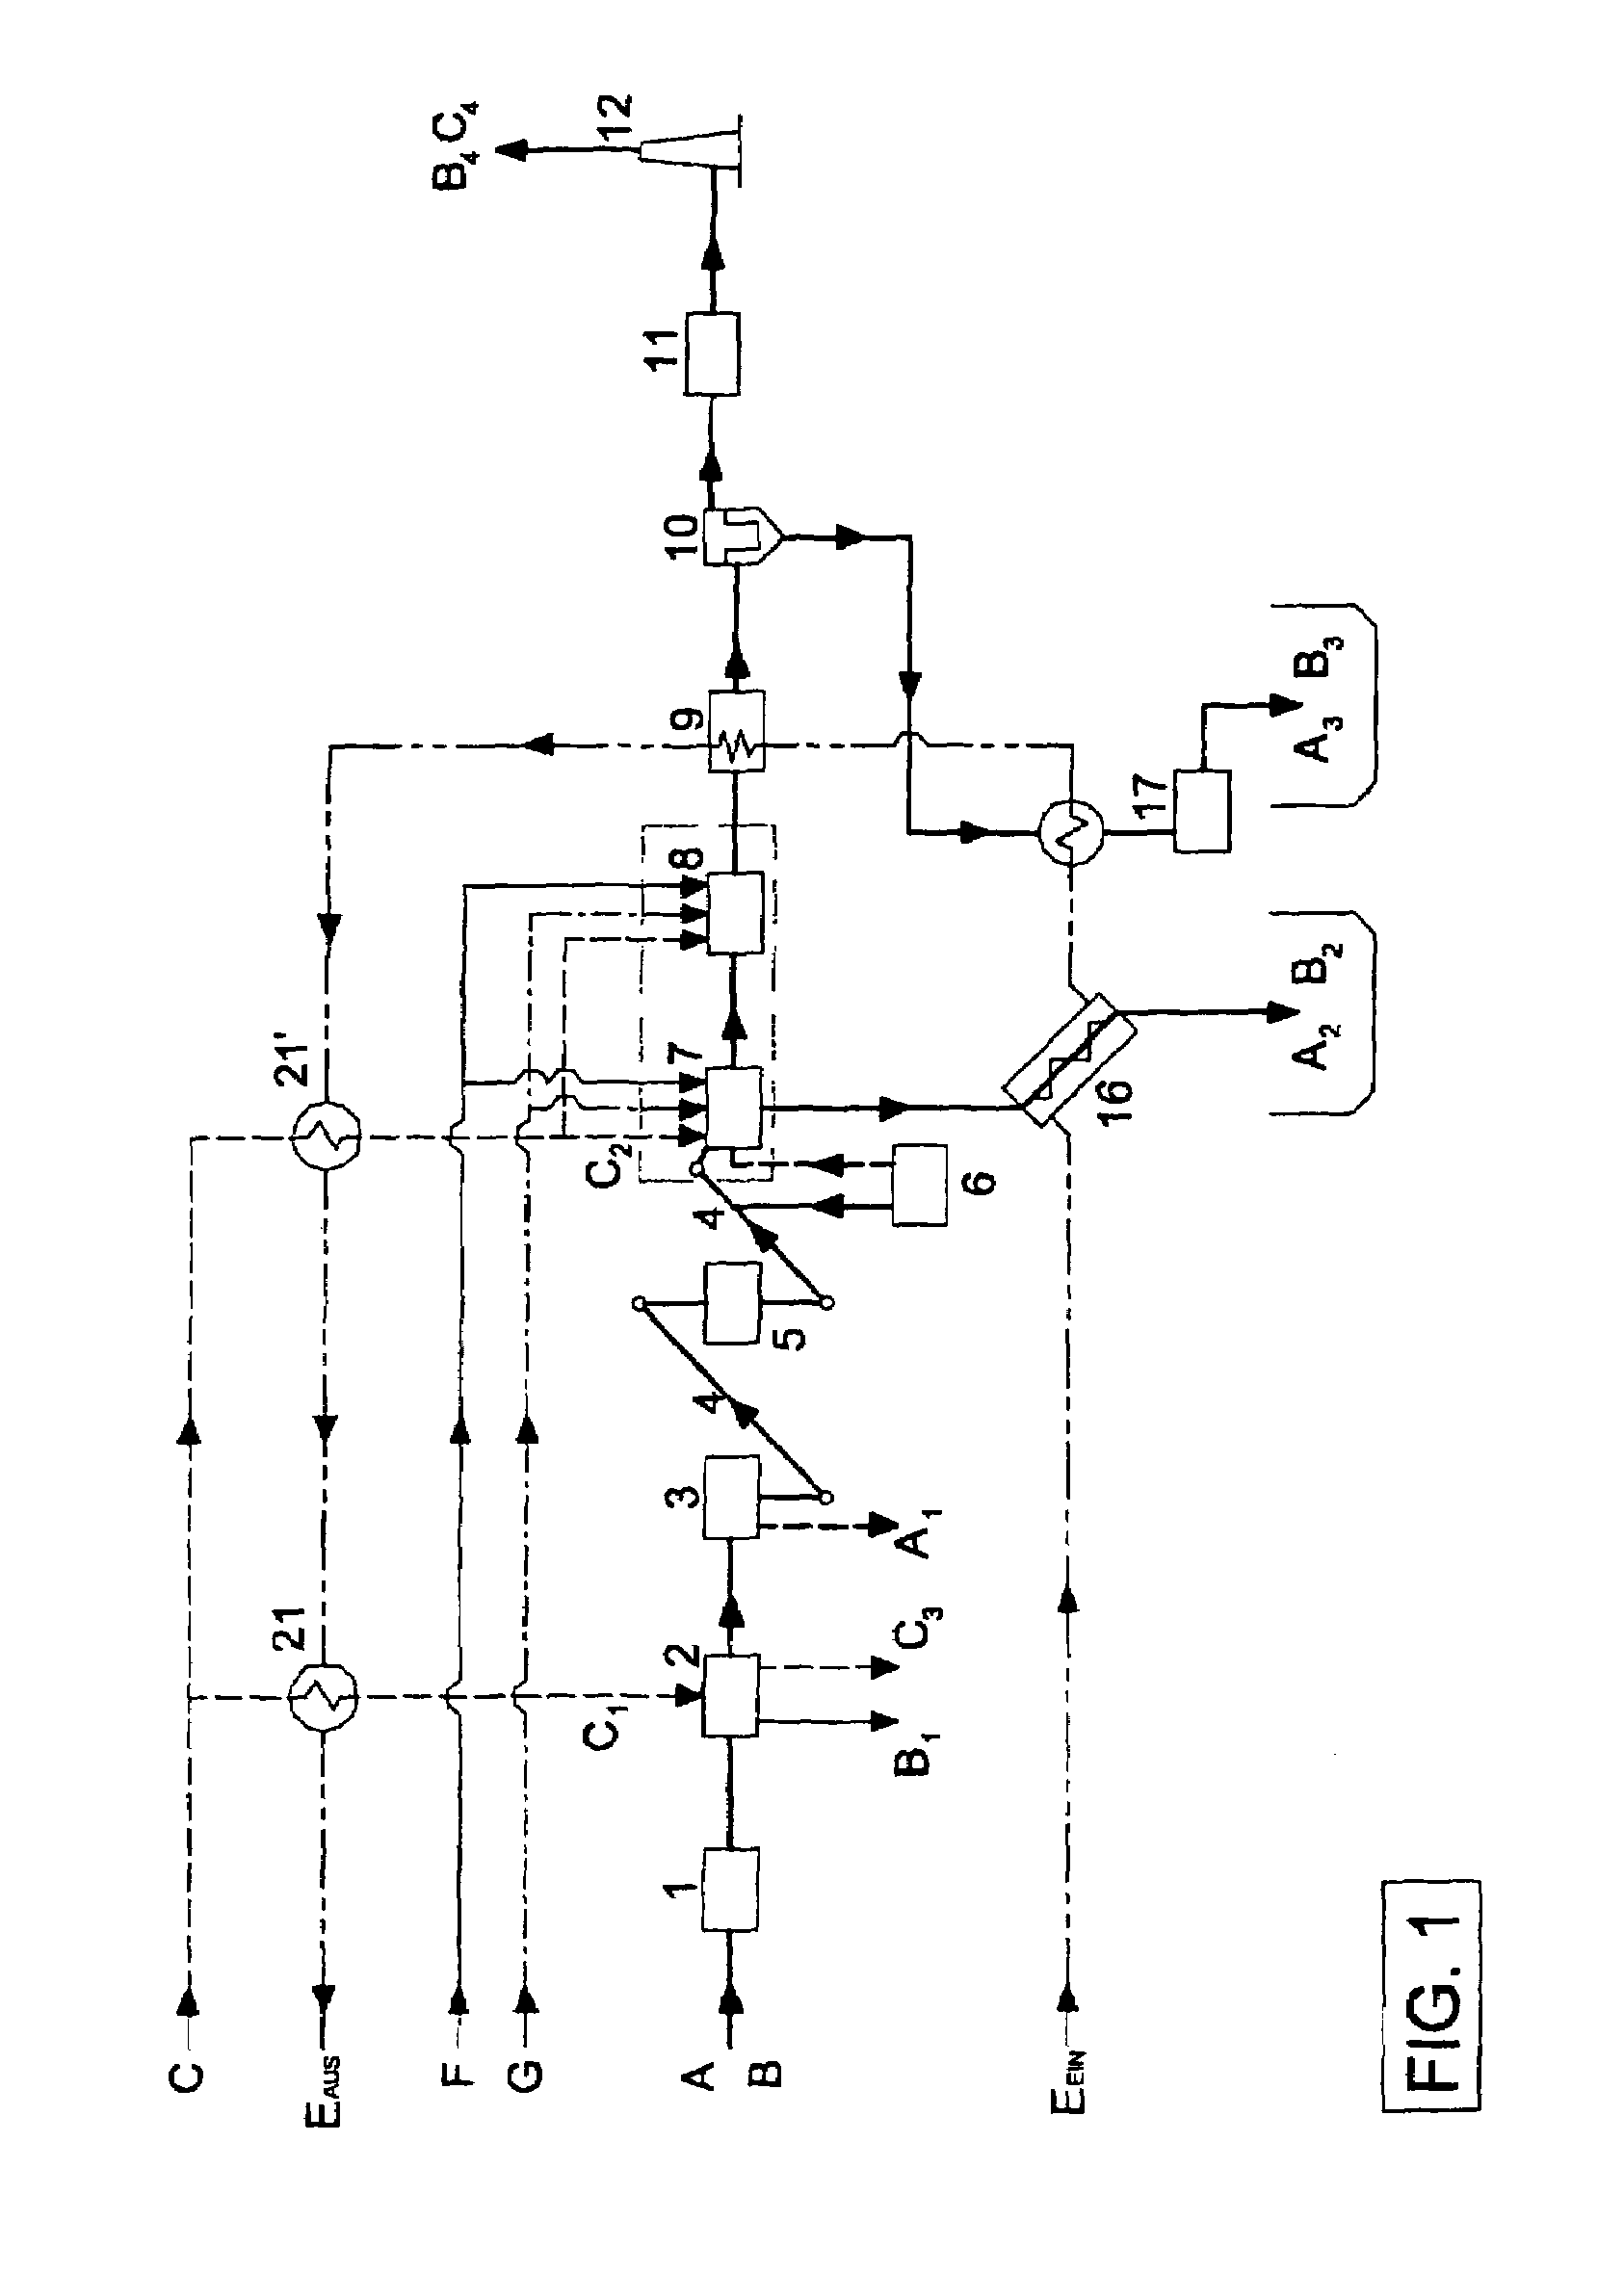 Process and apparatus for treating biogenic residues, particularly sludges